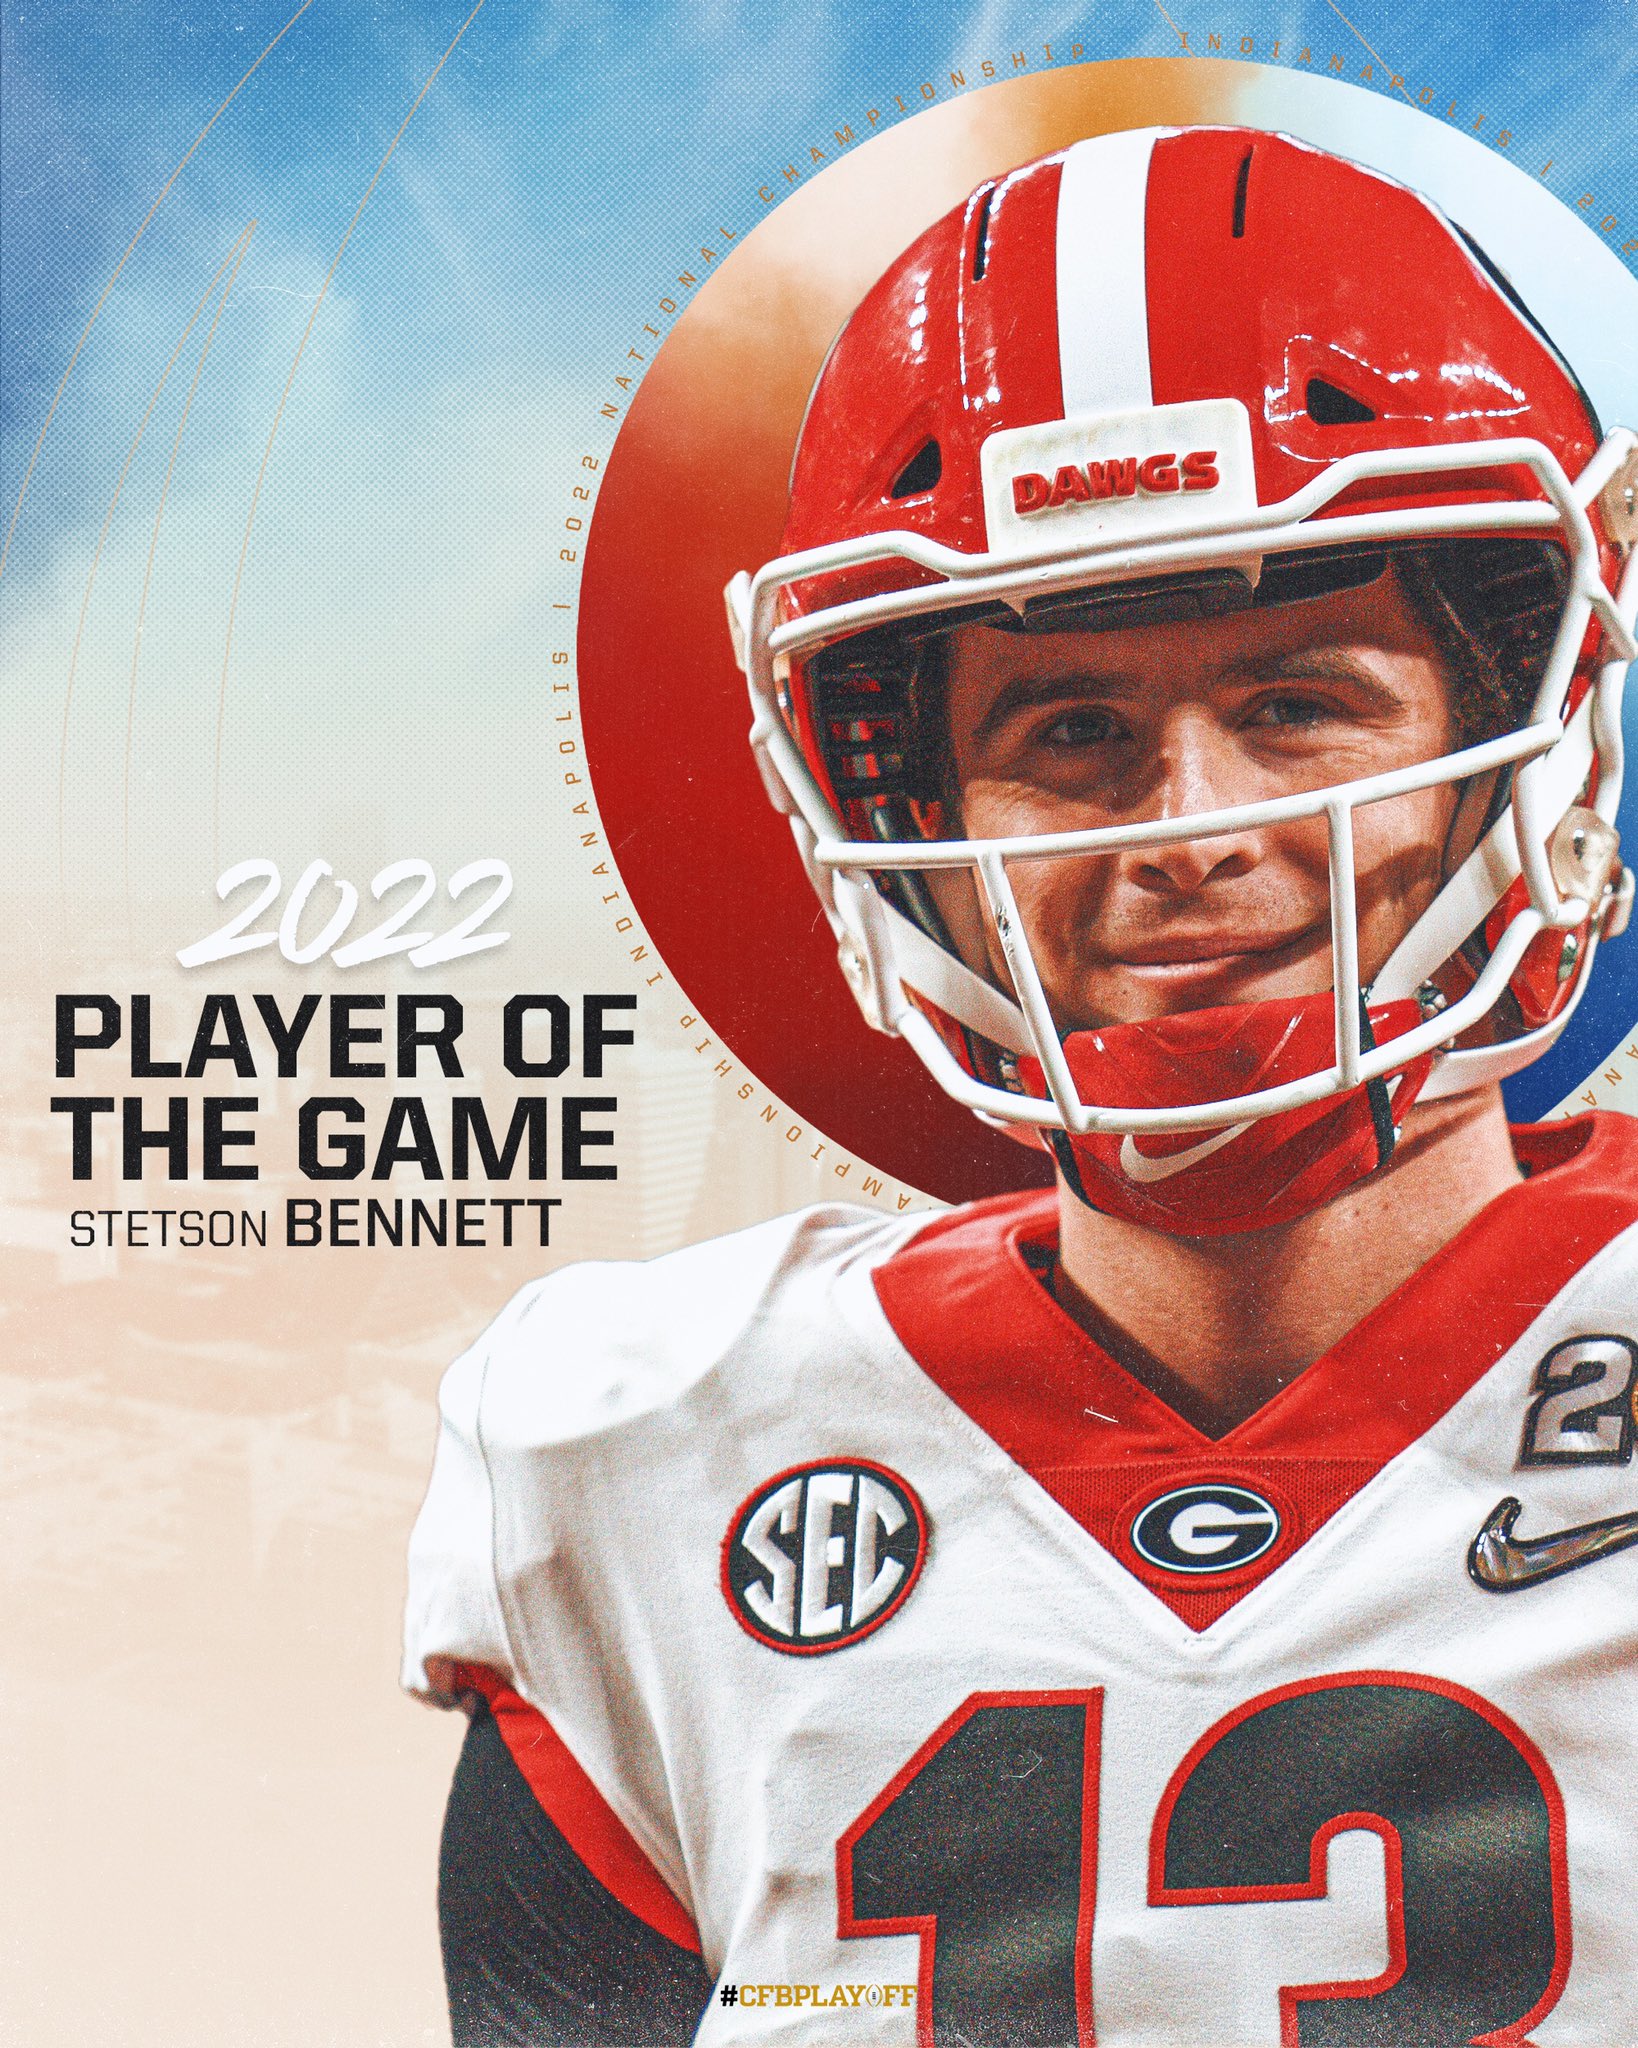 College Football Playoff Offensive Player of the Game. Stetson Bennett. #GoDawgs x #cfbplayoff